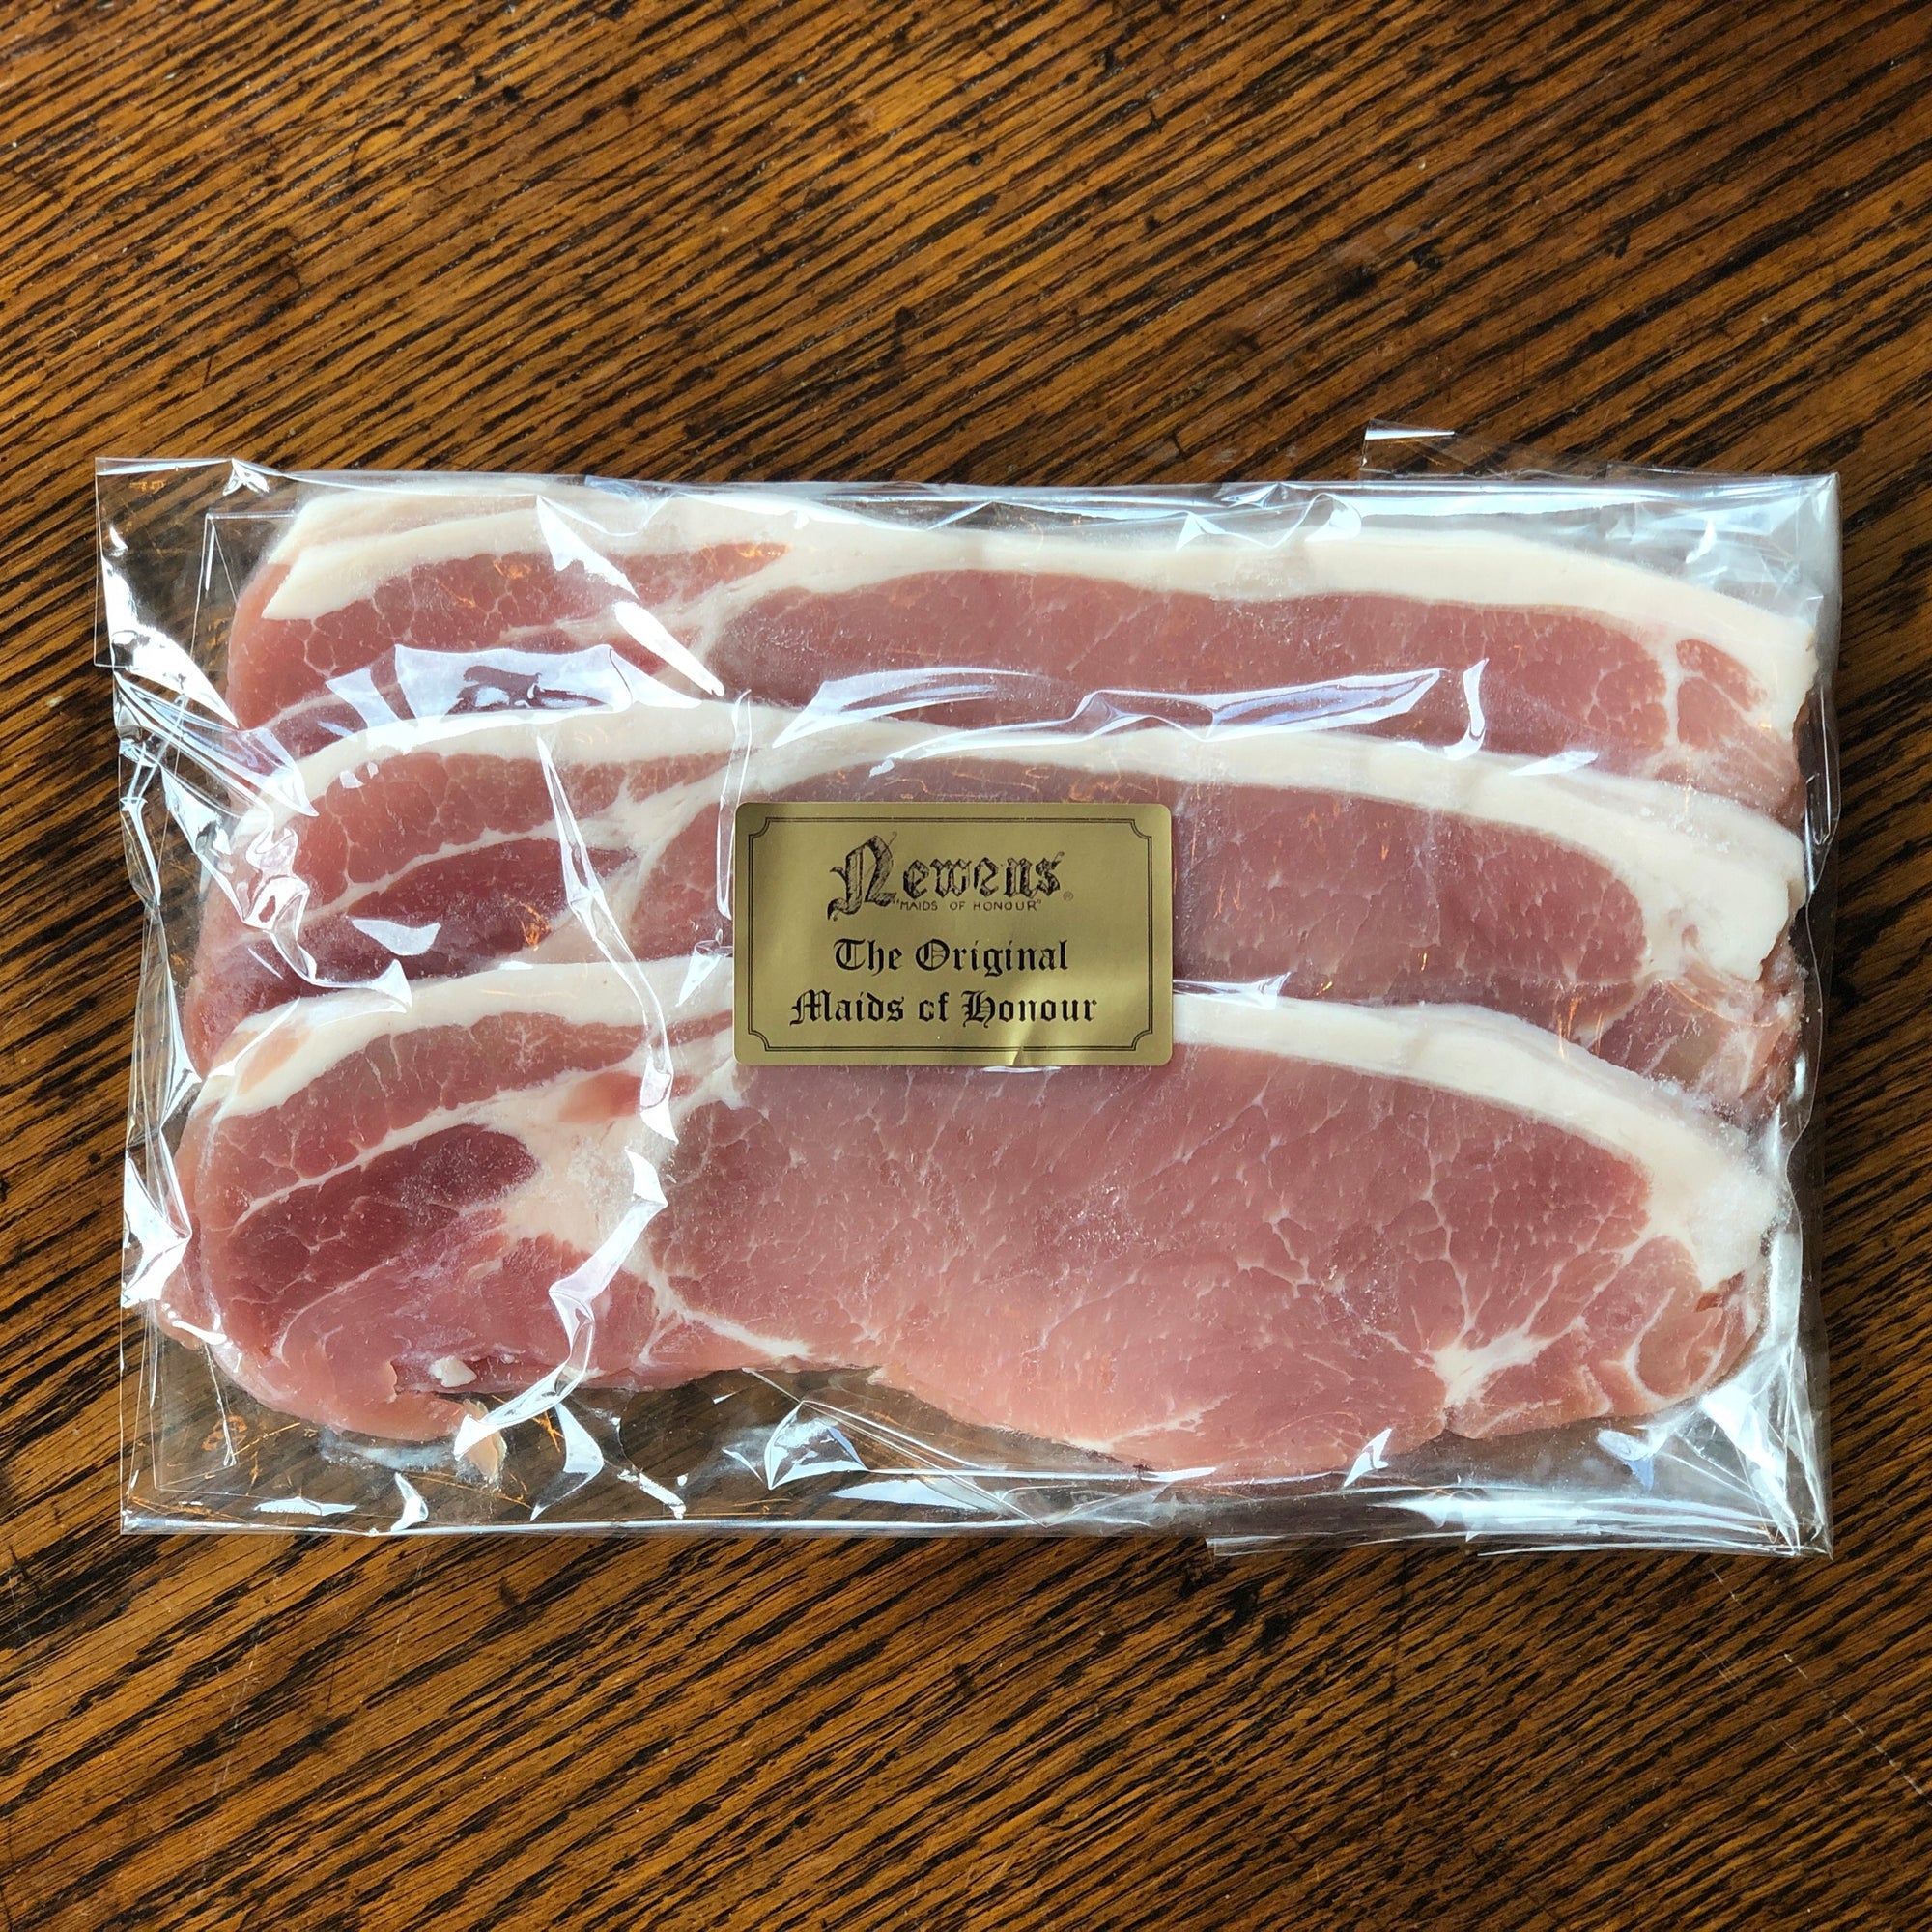 6x Rashers of Unsmoked Back Bacon (approx.275g)